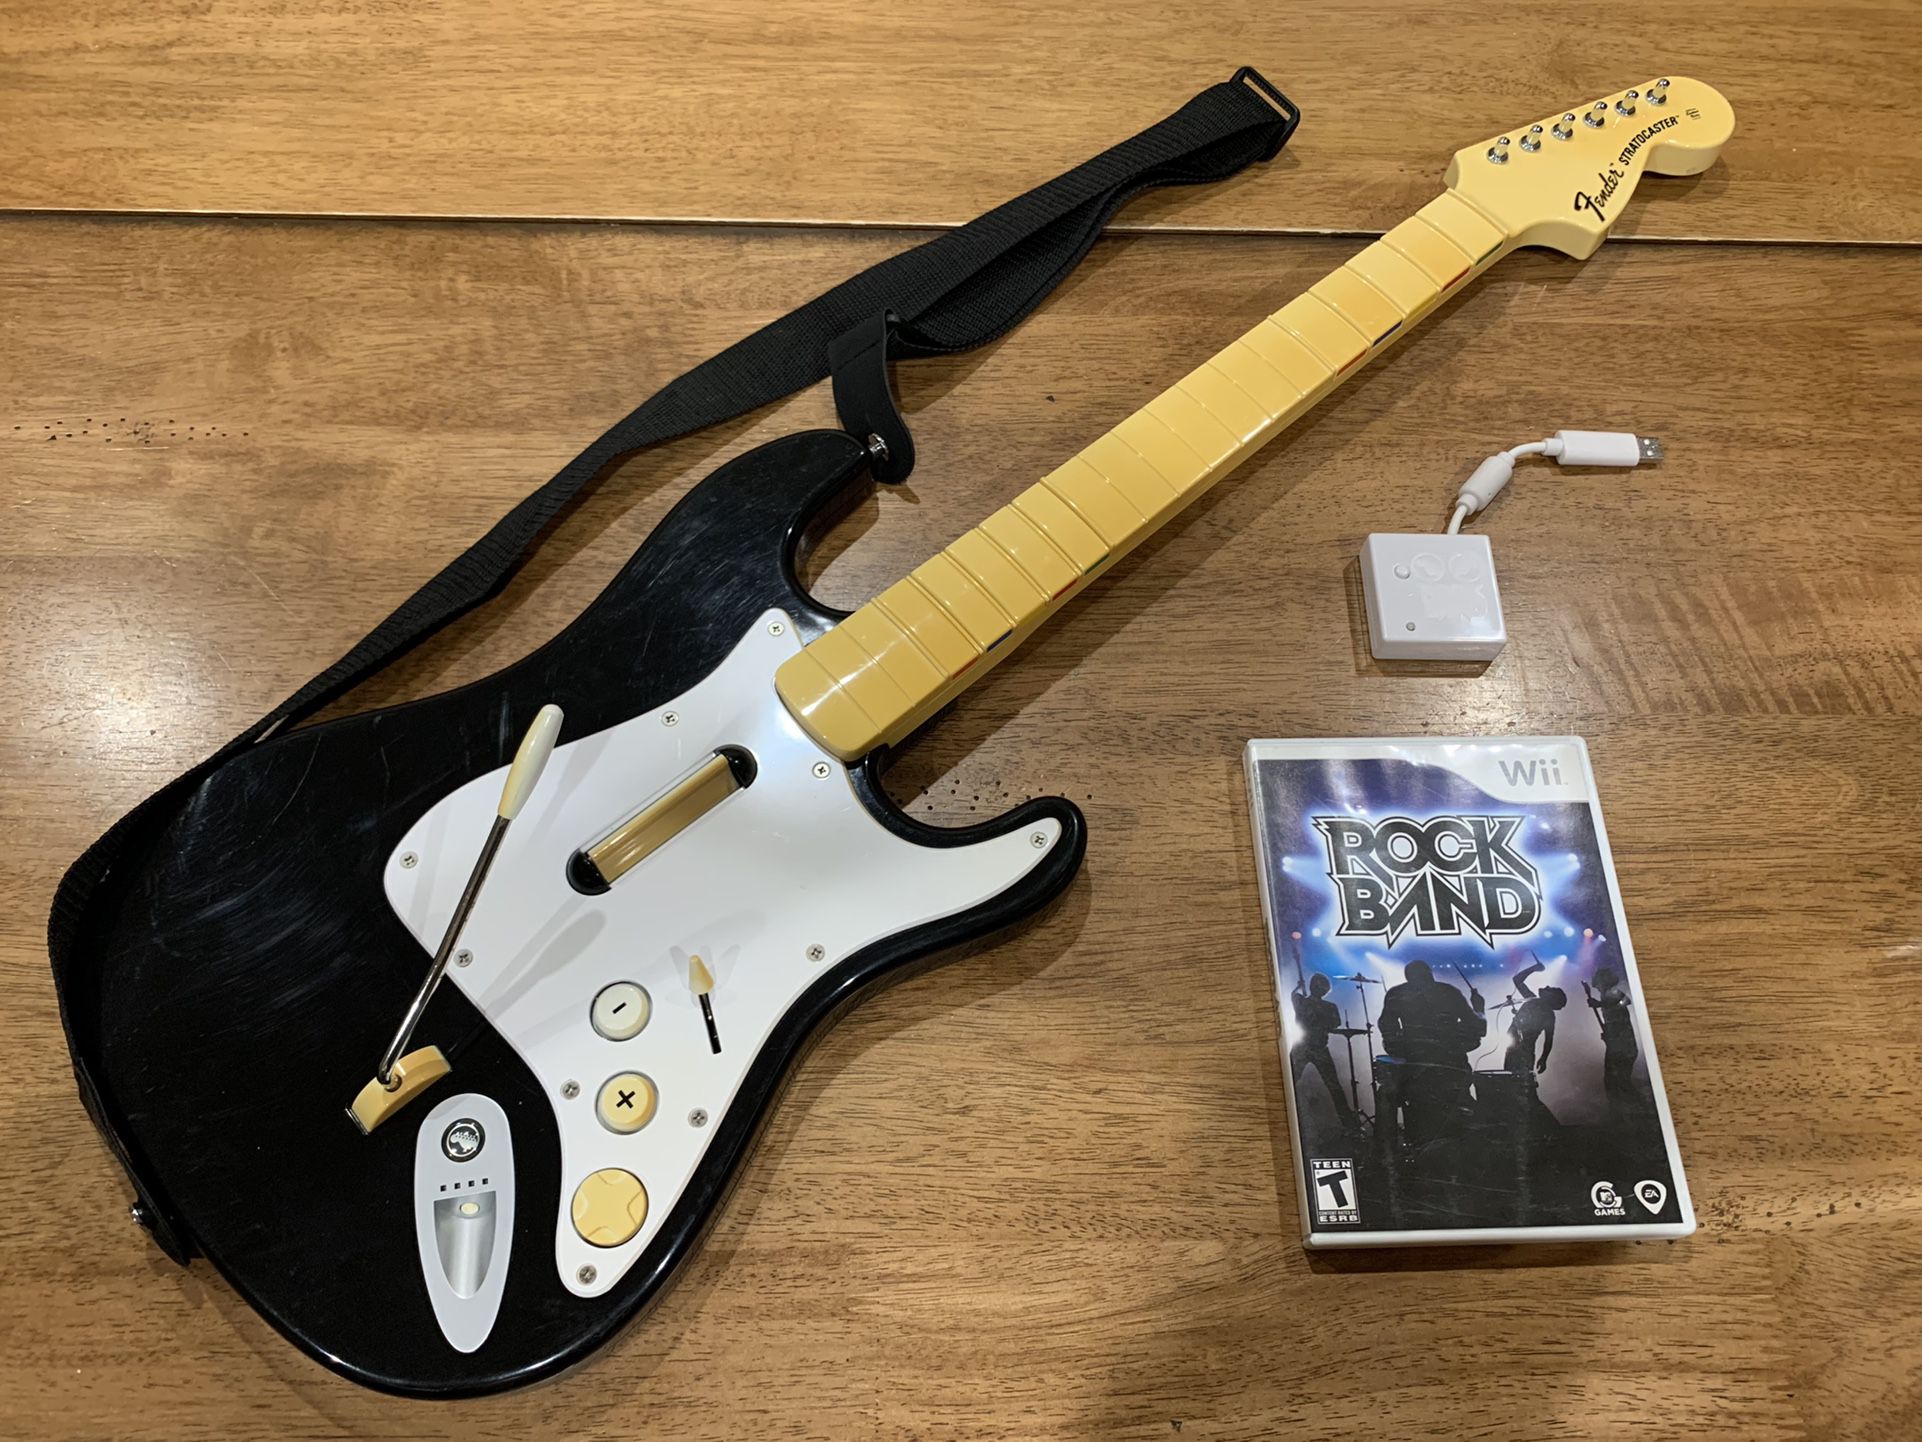 Wii Rock Band Fender Stratocaster Guitar w/ Dongle, Strap, & Rock Band Game